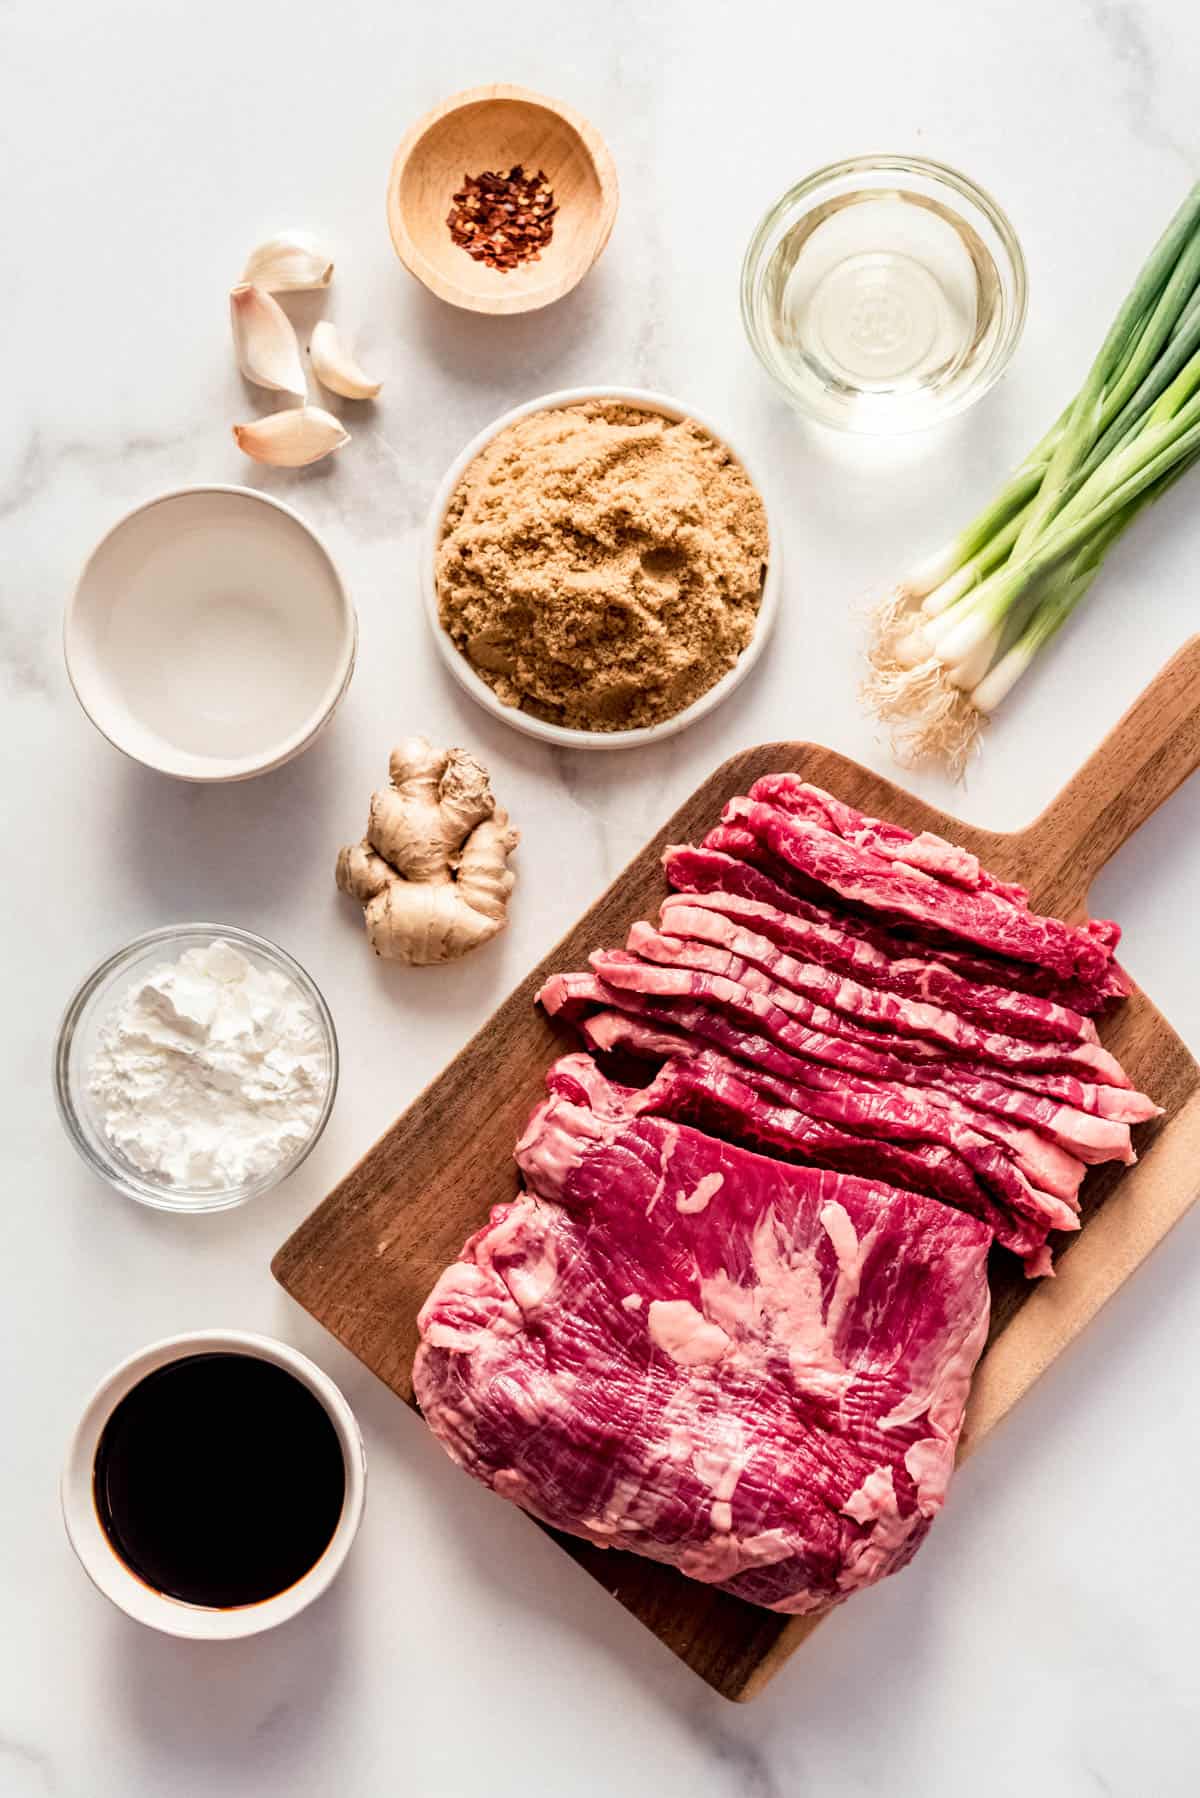 An image showing ingredients needed to make Mongolian Beef.